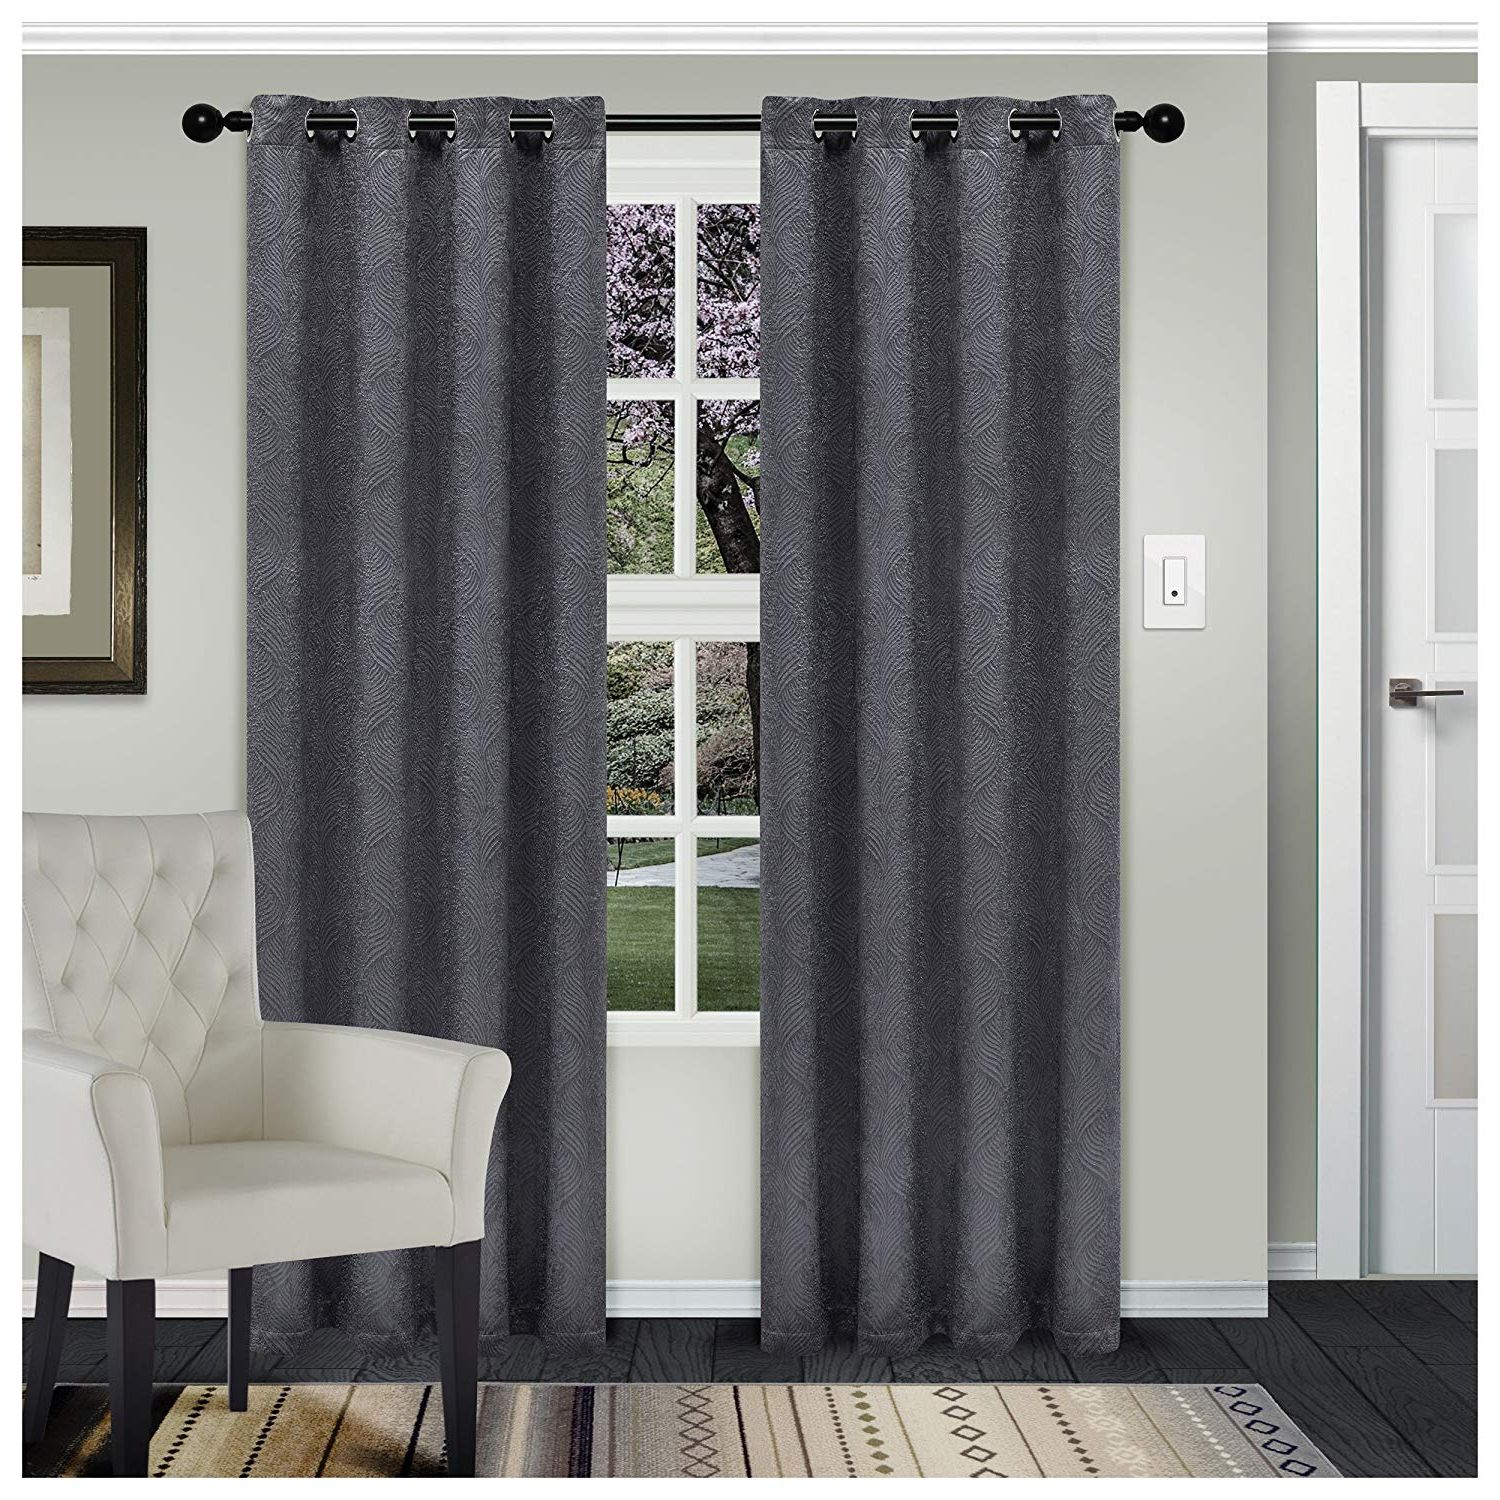 Well Known Grommet Top Thermal Insulated Blackout Curtain Panel Pairs In Superior Waverly Blackout Curtain Set Of 2, Thermal Insulated Panel Pair  With Grommet Top Header, Beautiful Embossed Wave Room Darkening Drapes, (View 11 of 20)